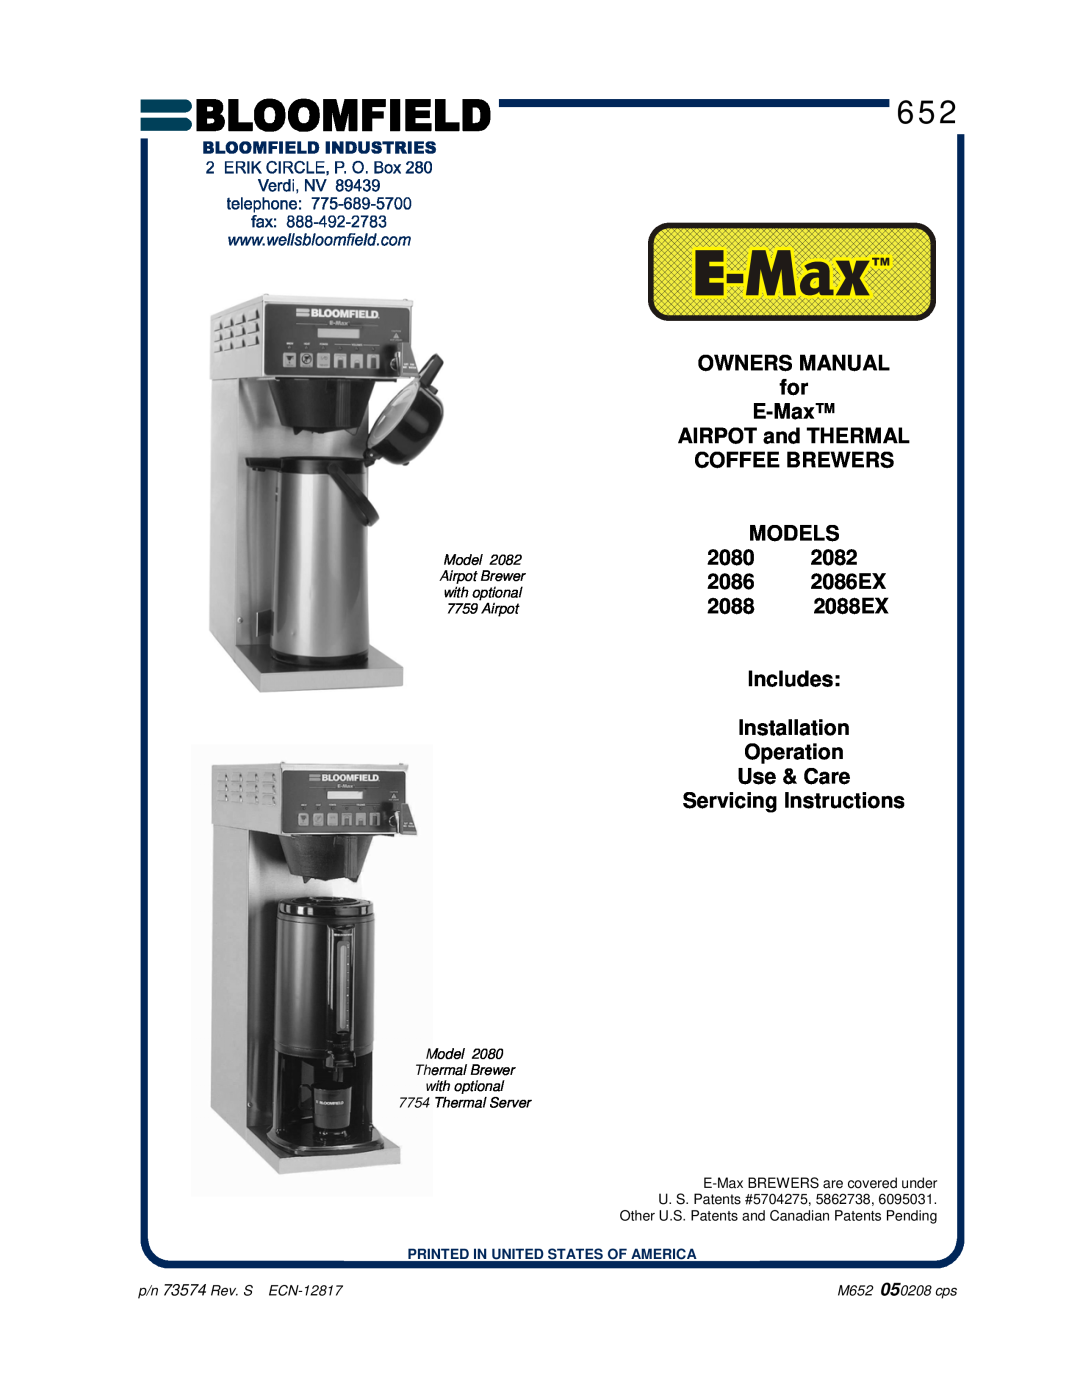 Bloomfield 2088 owner manual OWNERS MANUAL for E-Max AIRPOT and THERMAL COFFEE BREWERS MODELS 2080, Servicing Instructions 